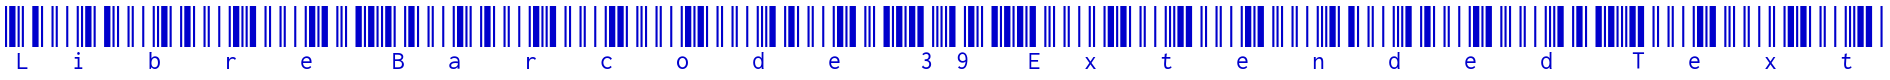 Libre Barcode 39 Extended Text fonte